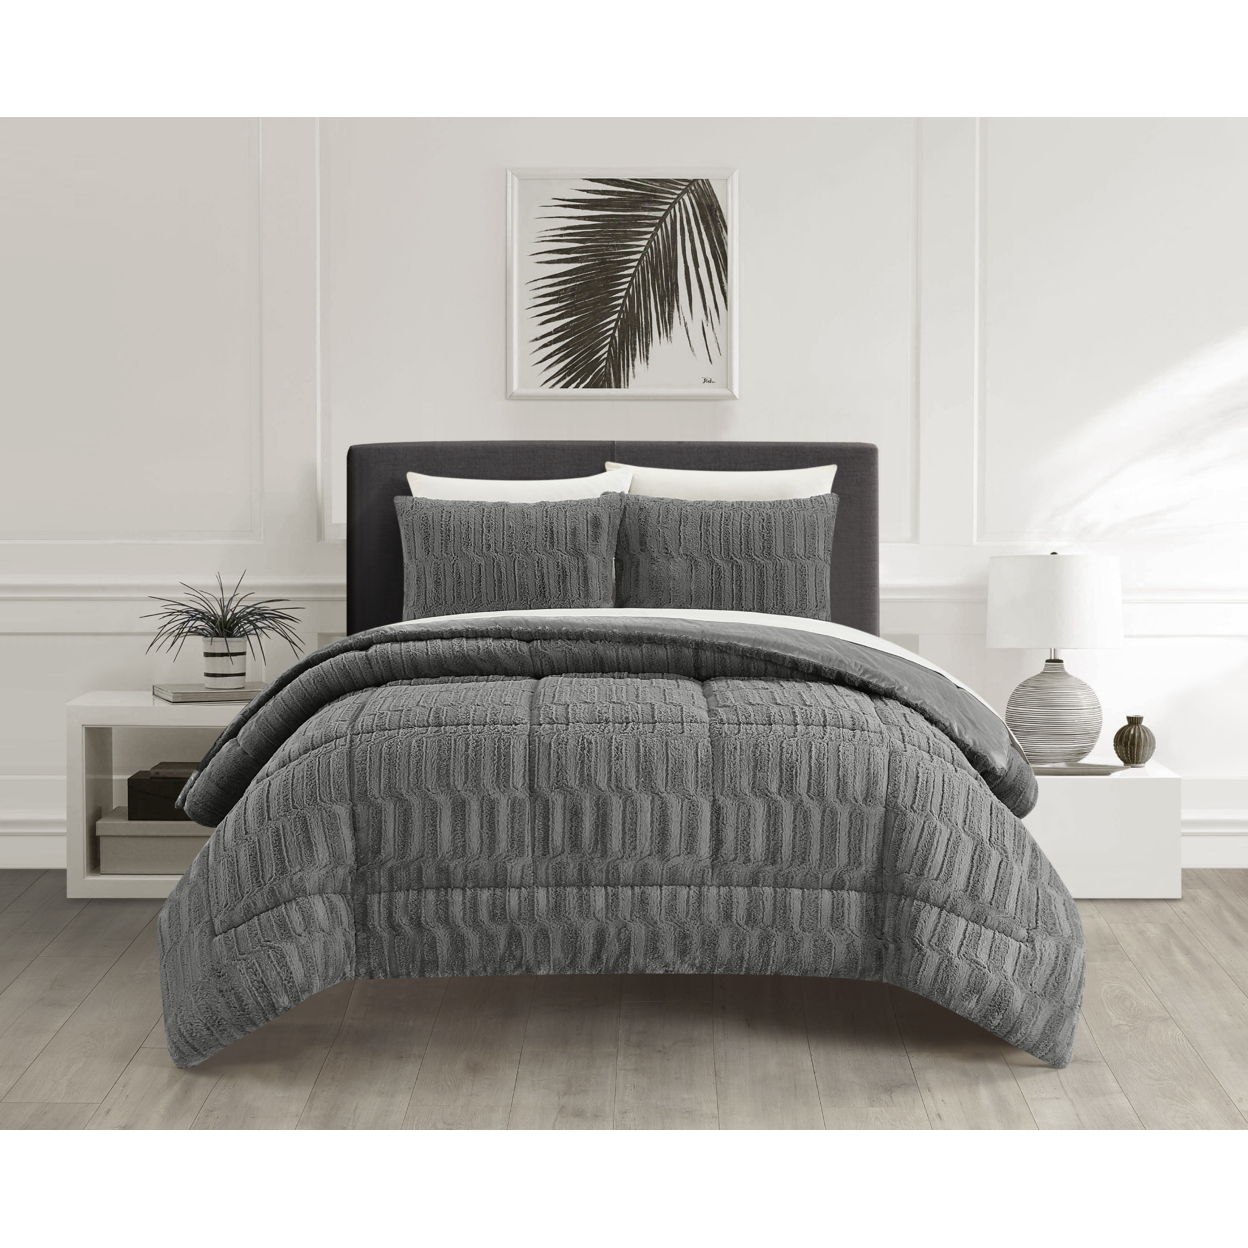 Farca 3 Or 2 Piece Comforter Textured Geometric Pattern Faux Micro-Mink Backing - Grey, King - 3 Piece